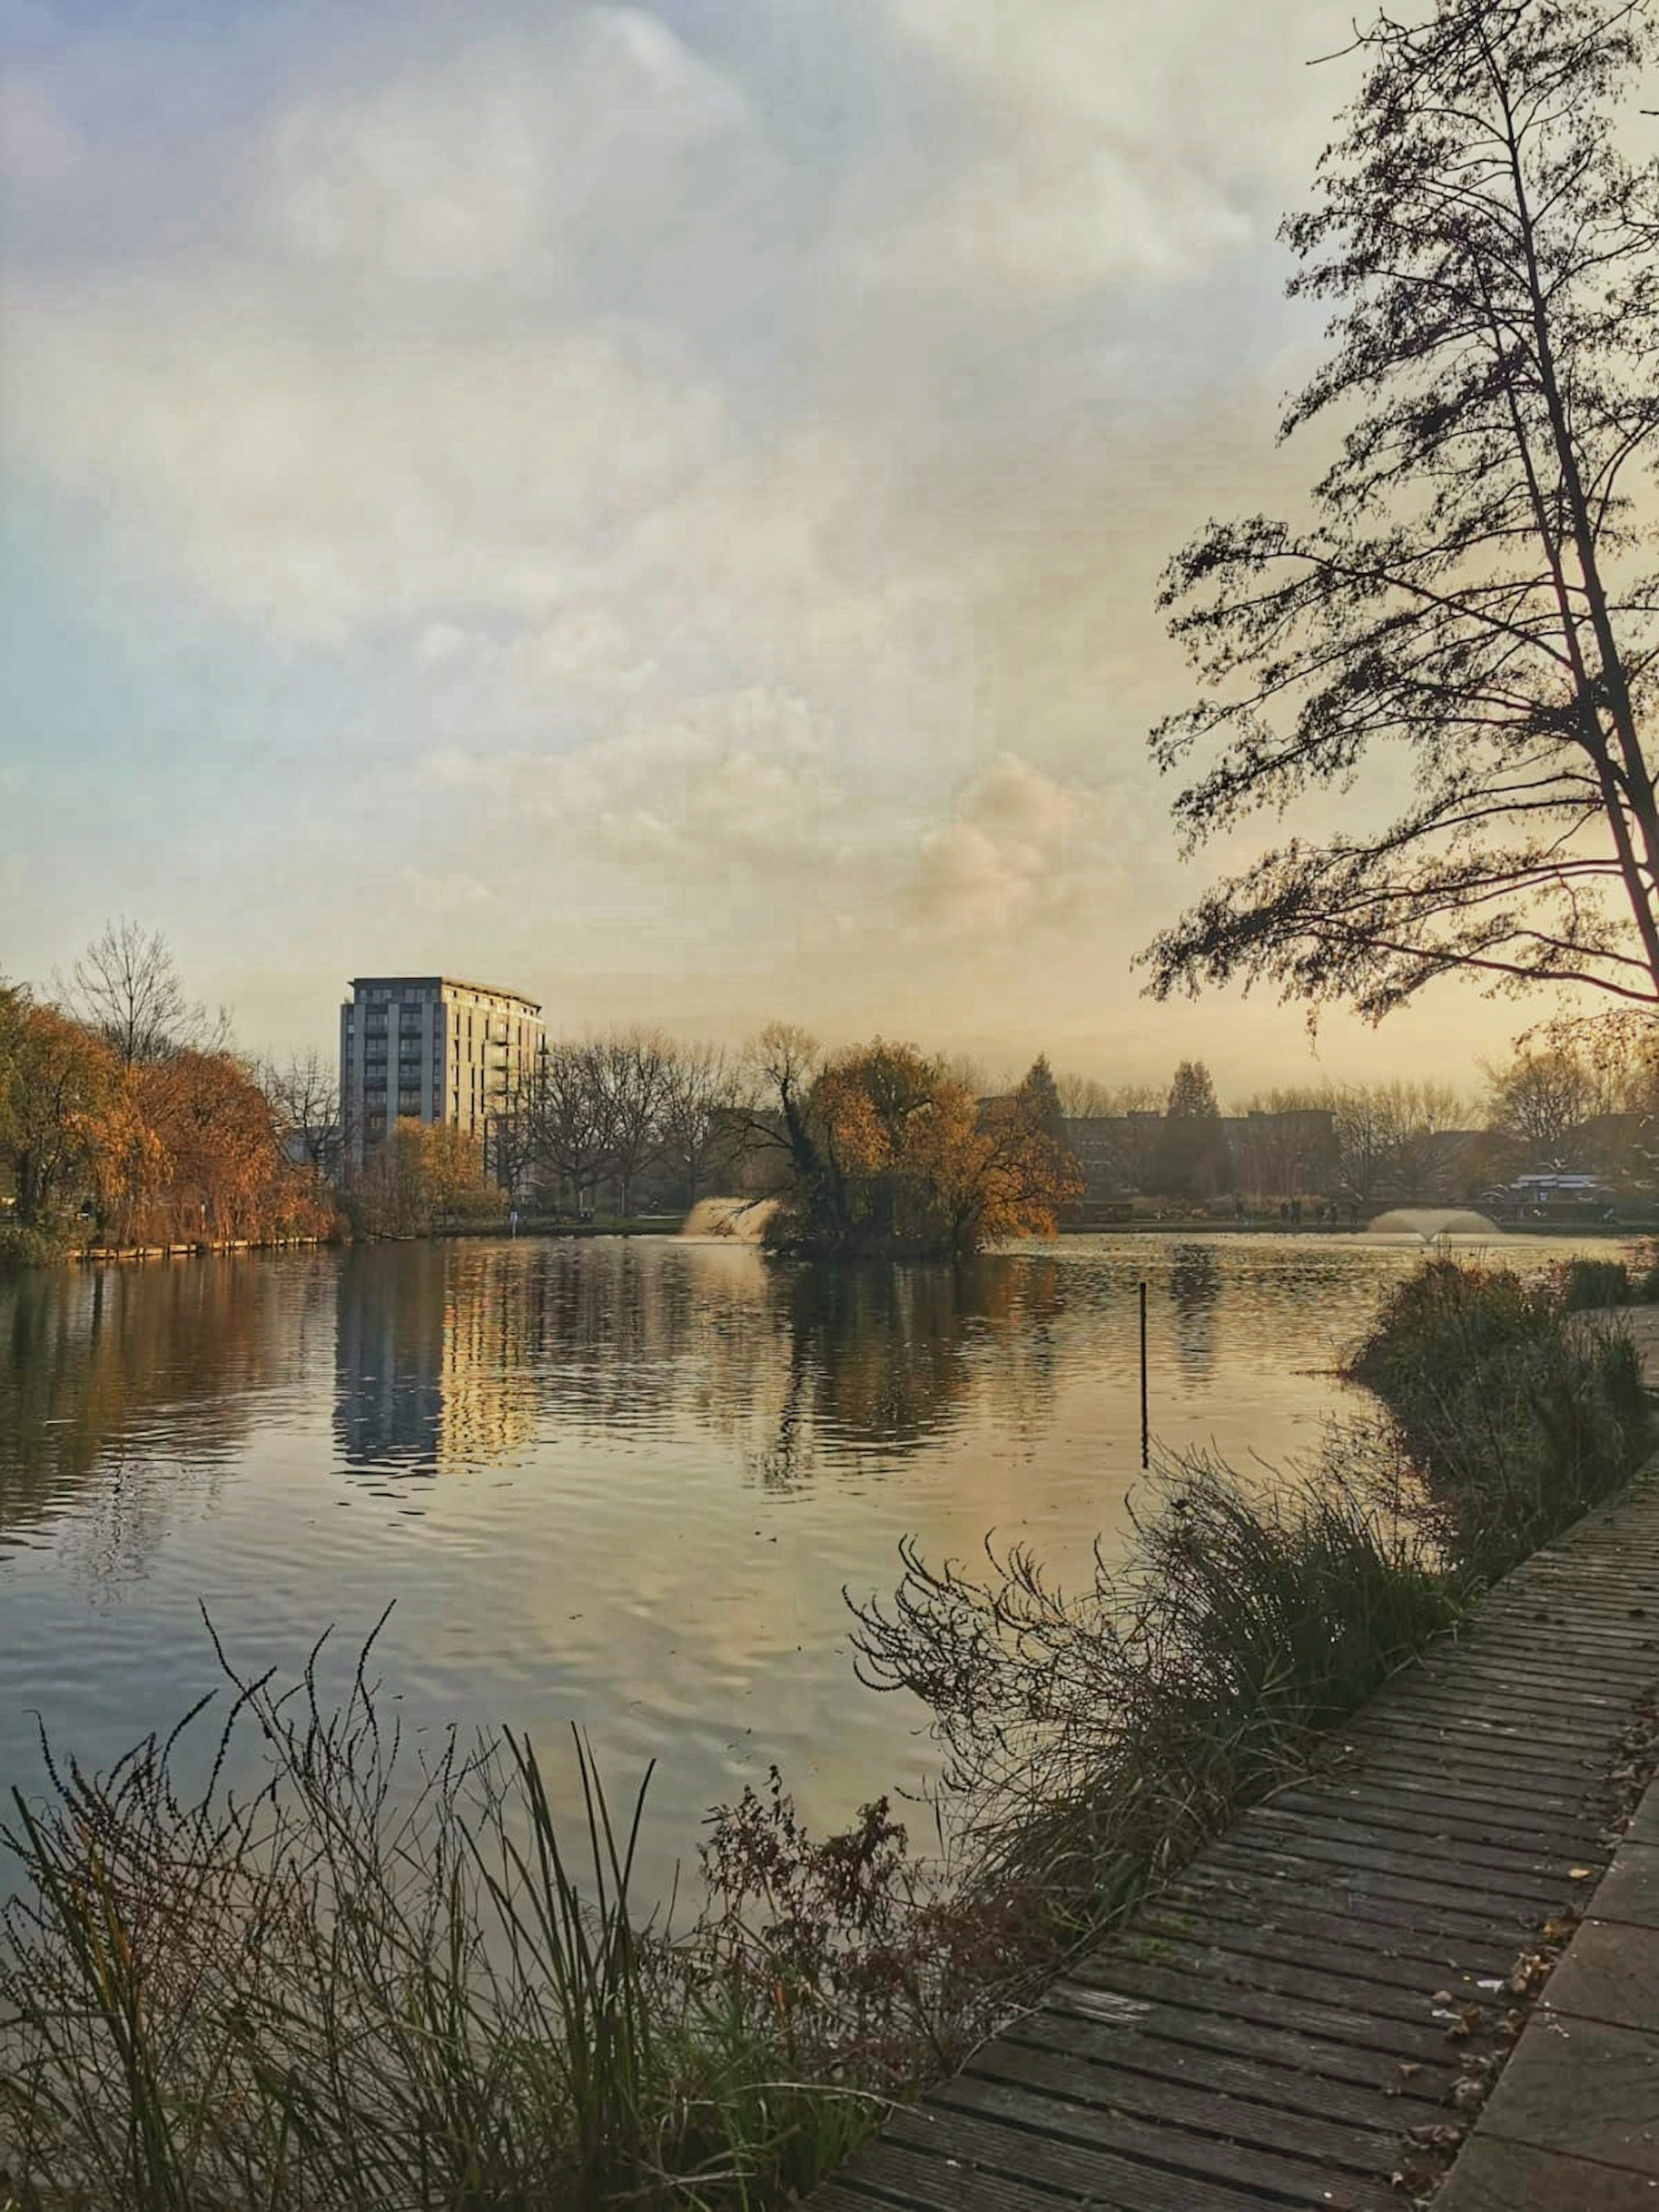 Autumn view of a lake with a tower block in the distance